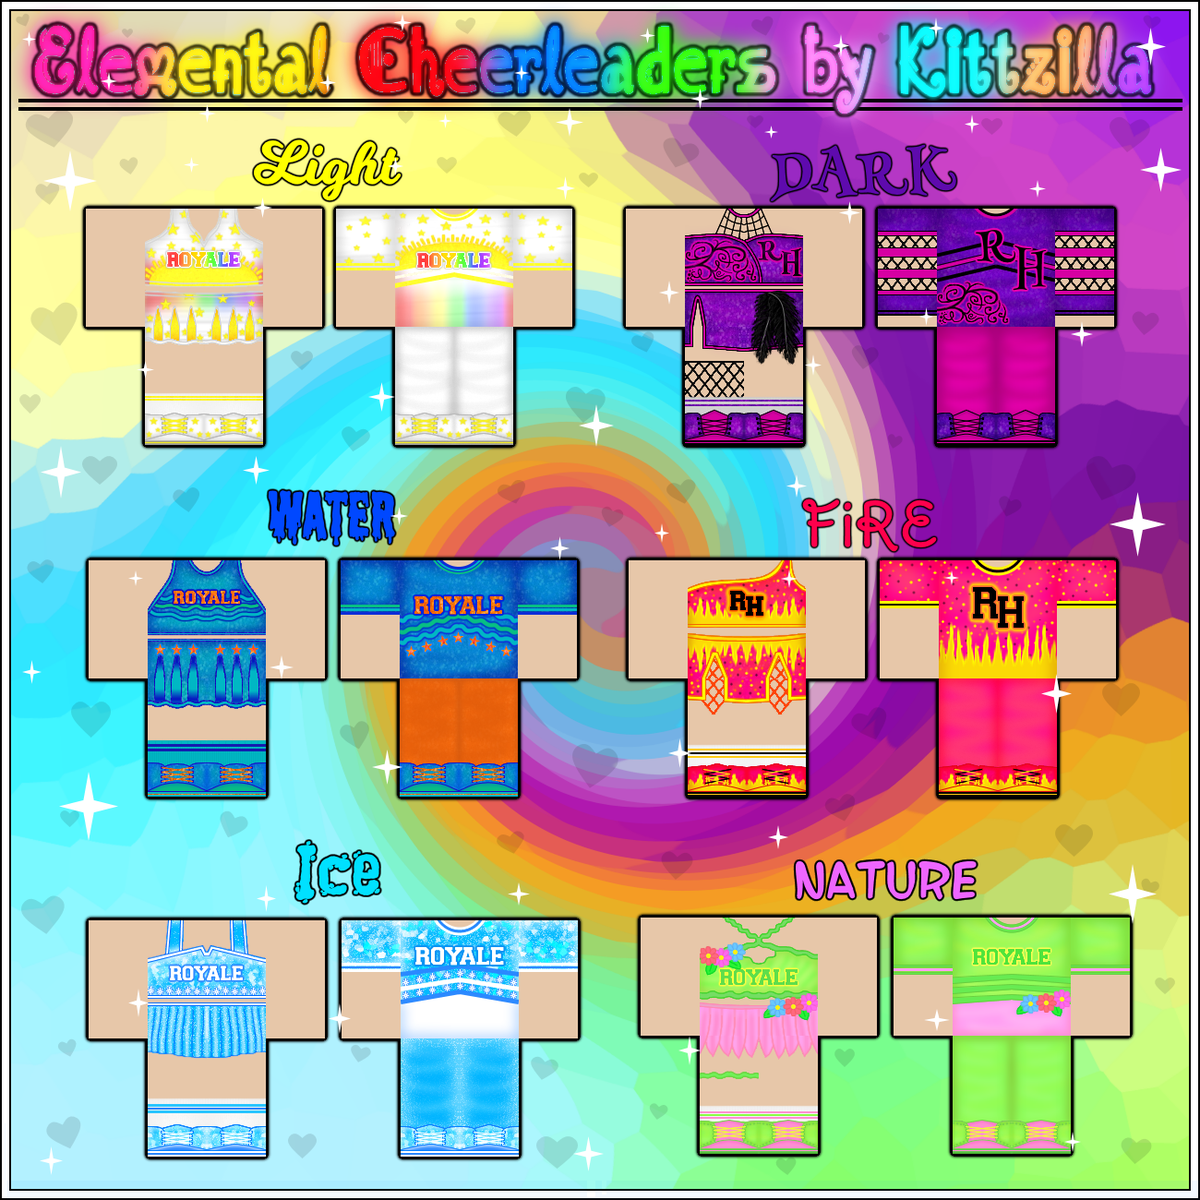 Kittzilla Heaven On Twitter Commission For Nightbarbie New Elemental Cheerleader Outfits I Made For The New Royale High School Coming These Were Super Fun To Create And I - cheerleader outfit codes for roblox high school t shirt